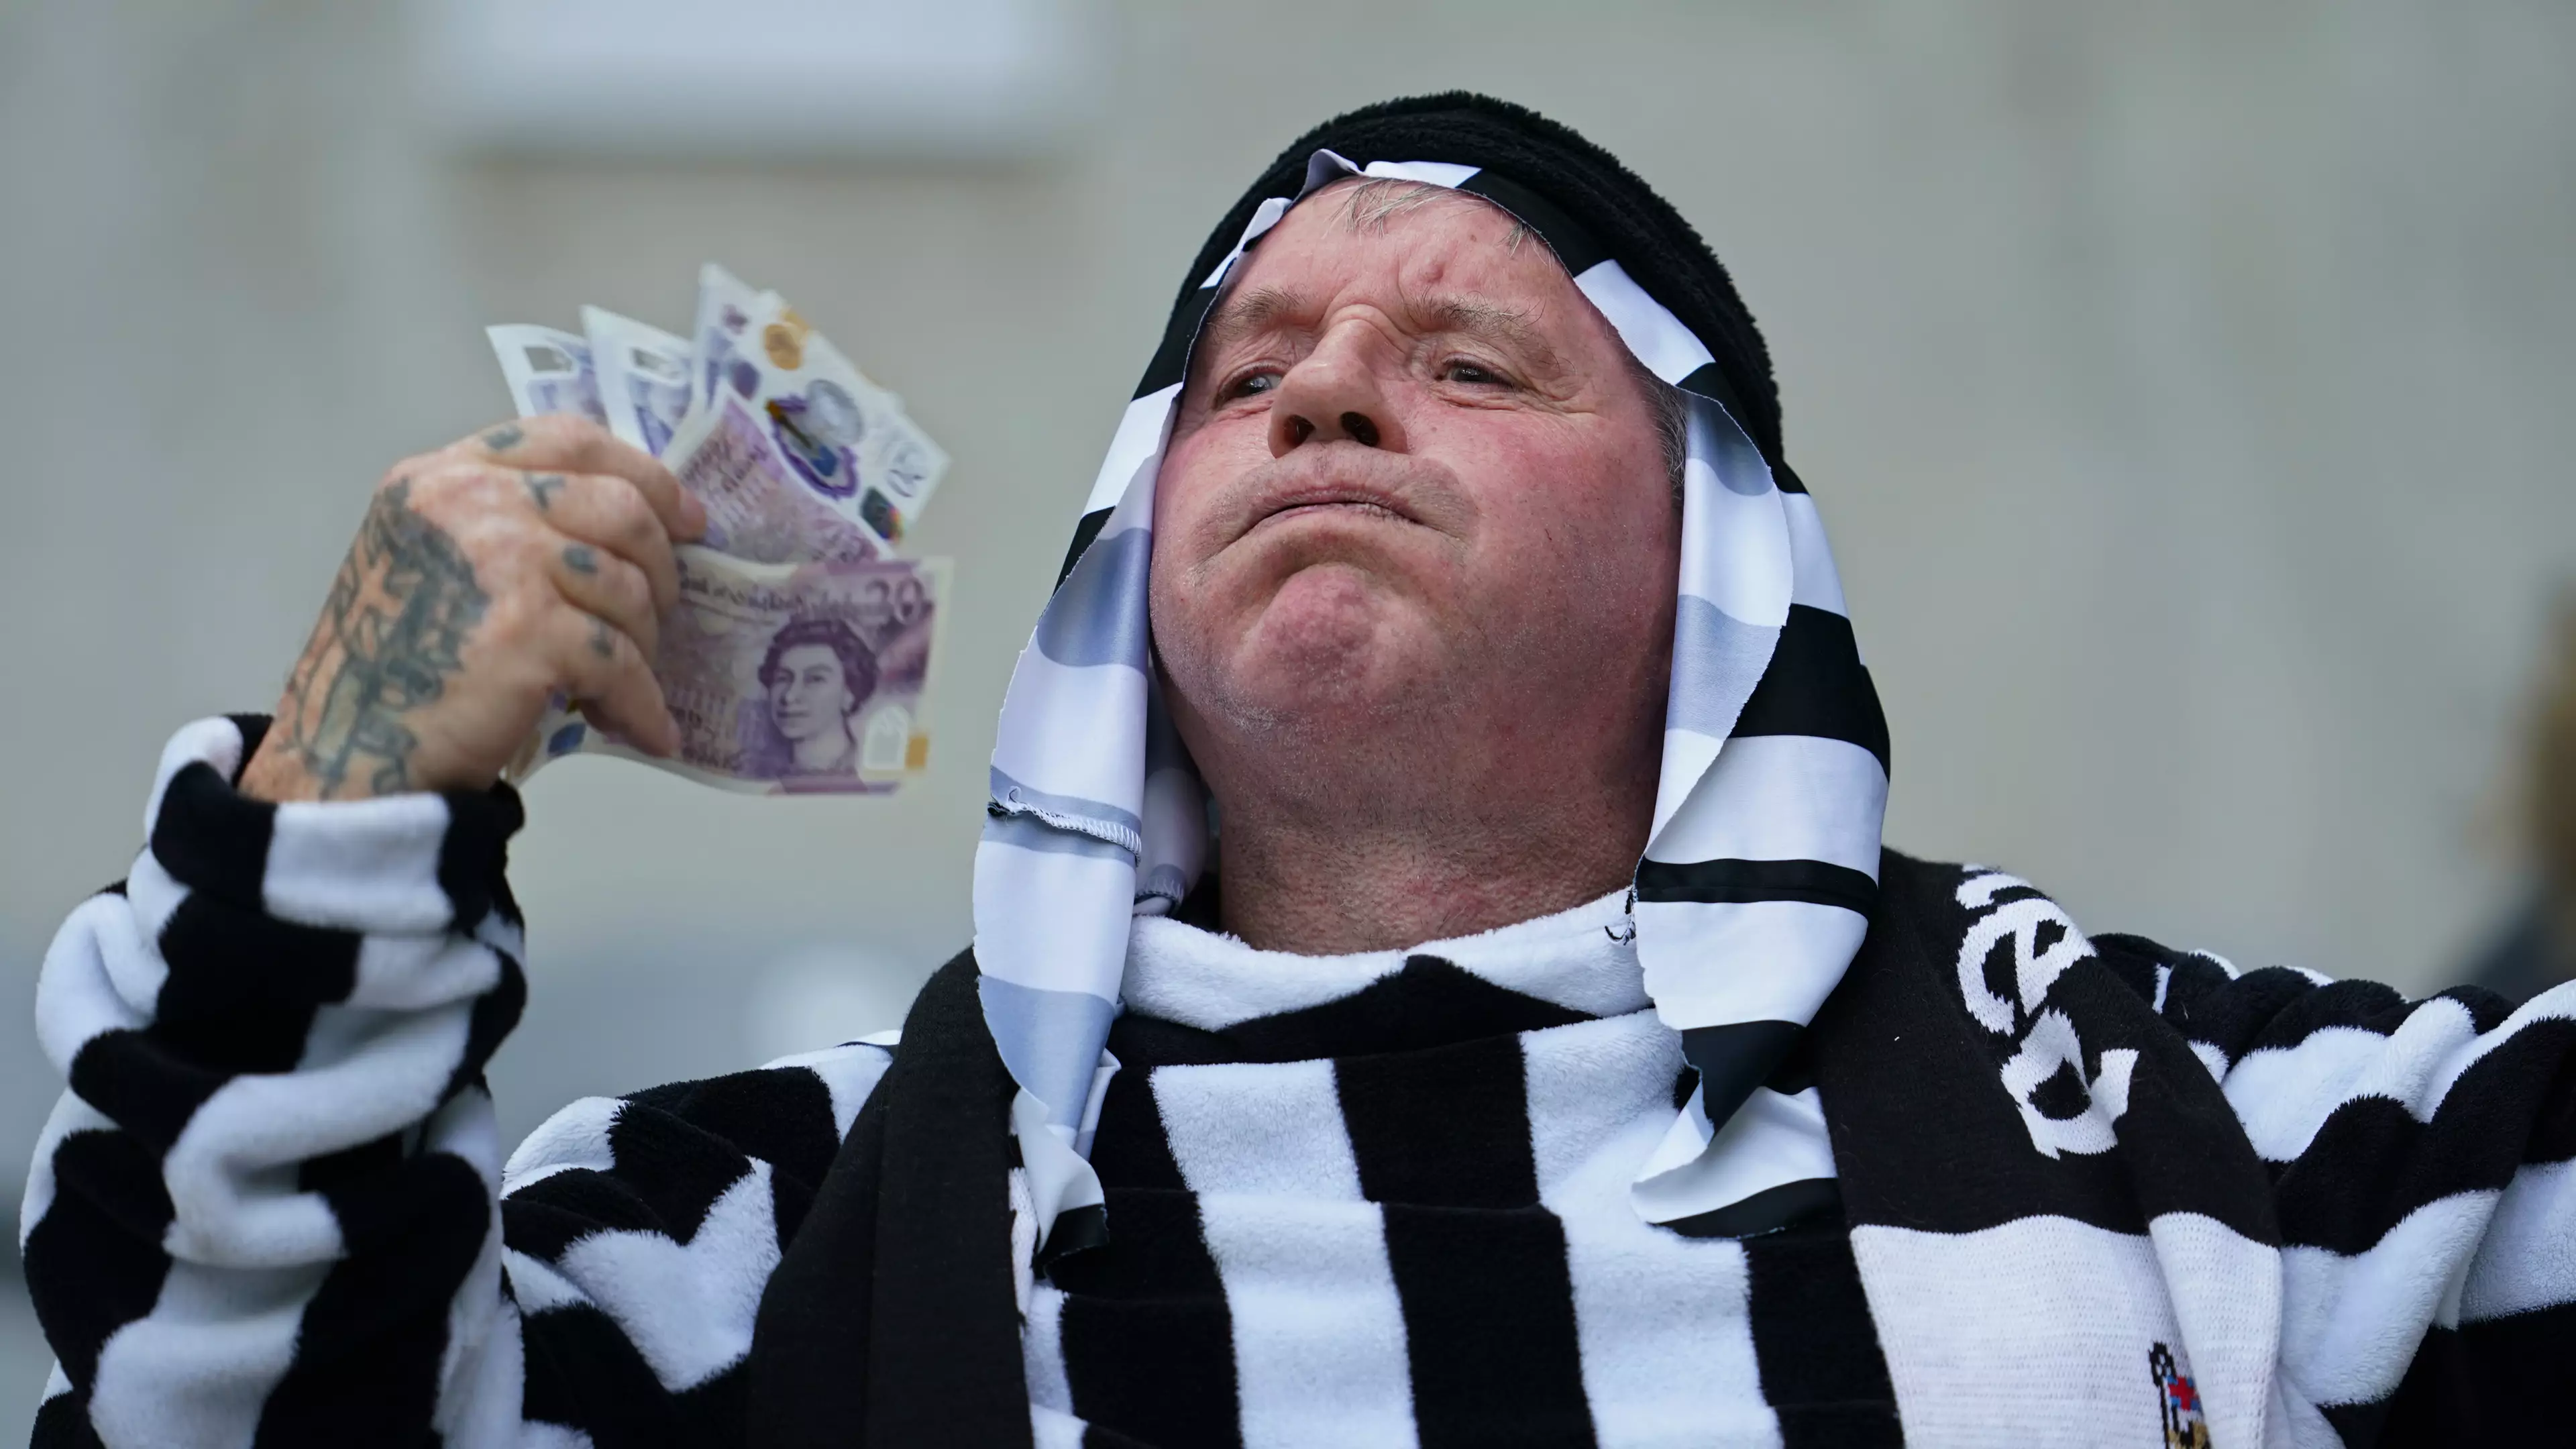 Newcastle United Urges Fans To Stop Wearing 'Culturally Inappropriate' Arabic Clothing